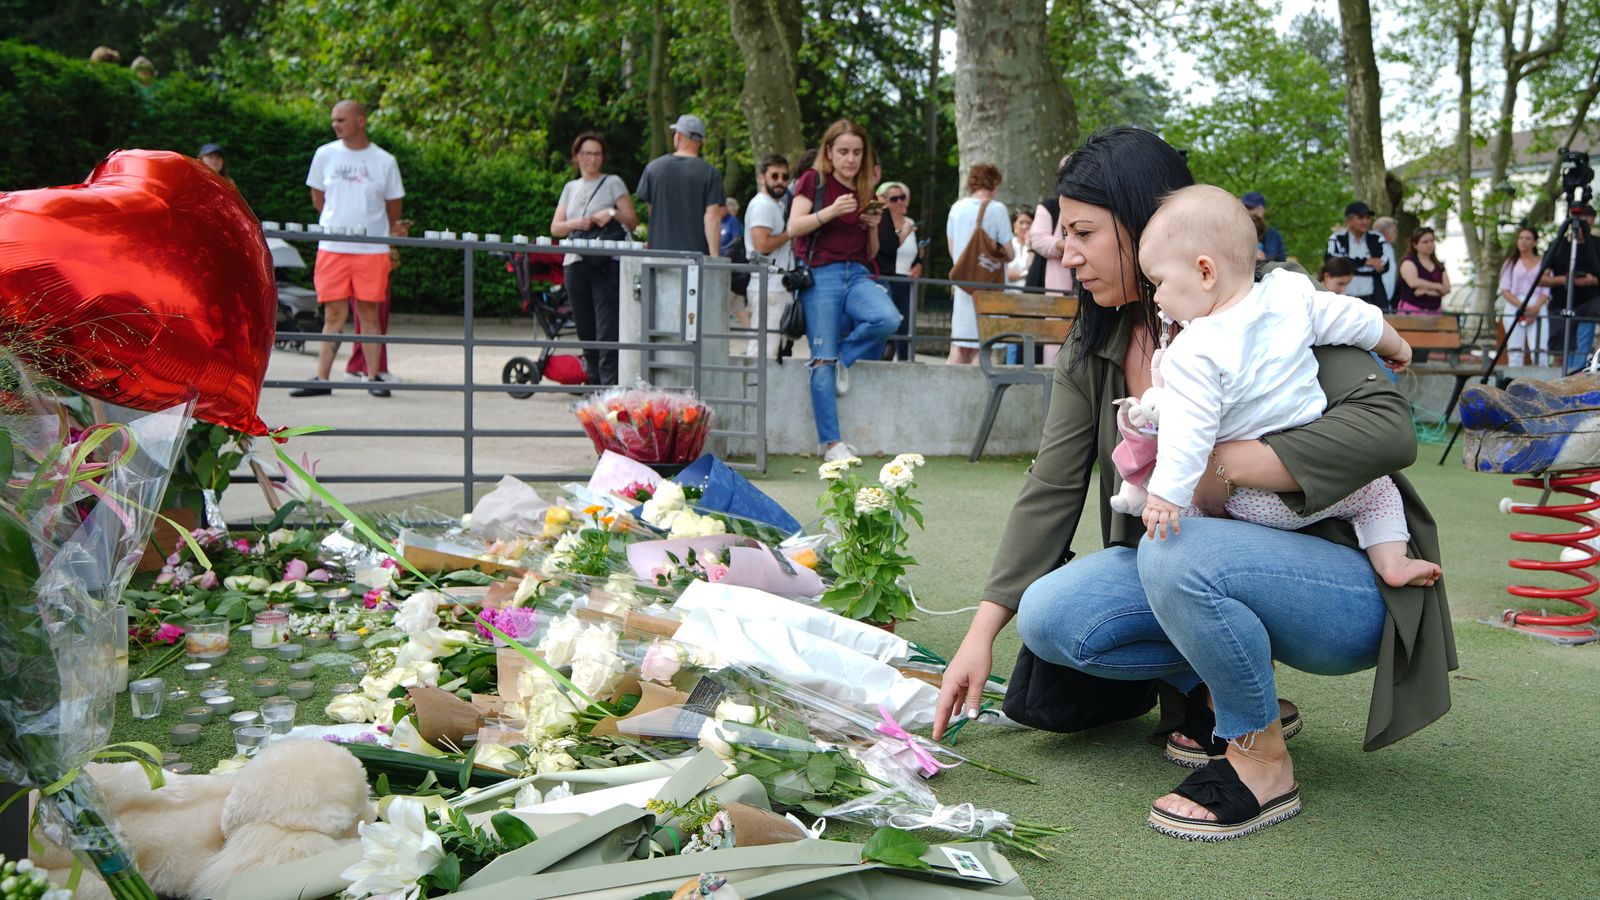 'You imagine the worst': People of Annecy reflect on playground attack